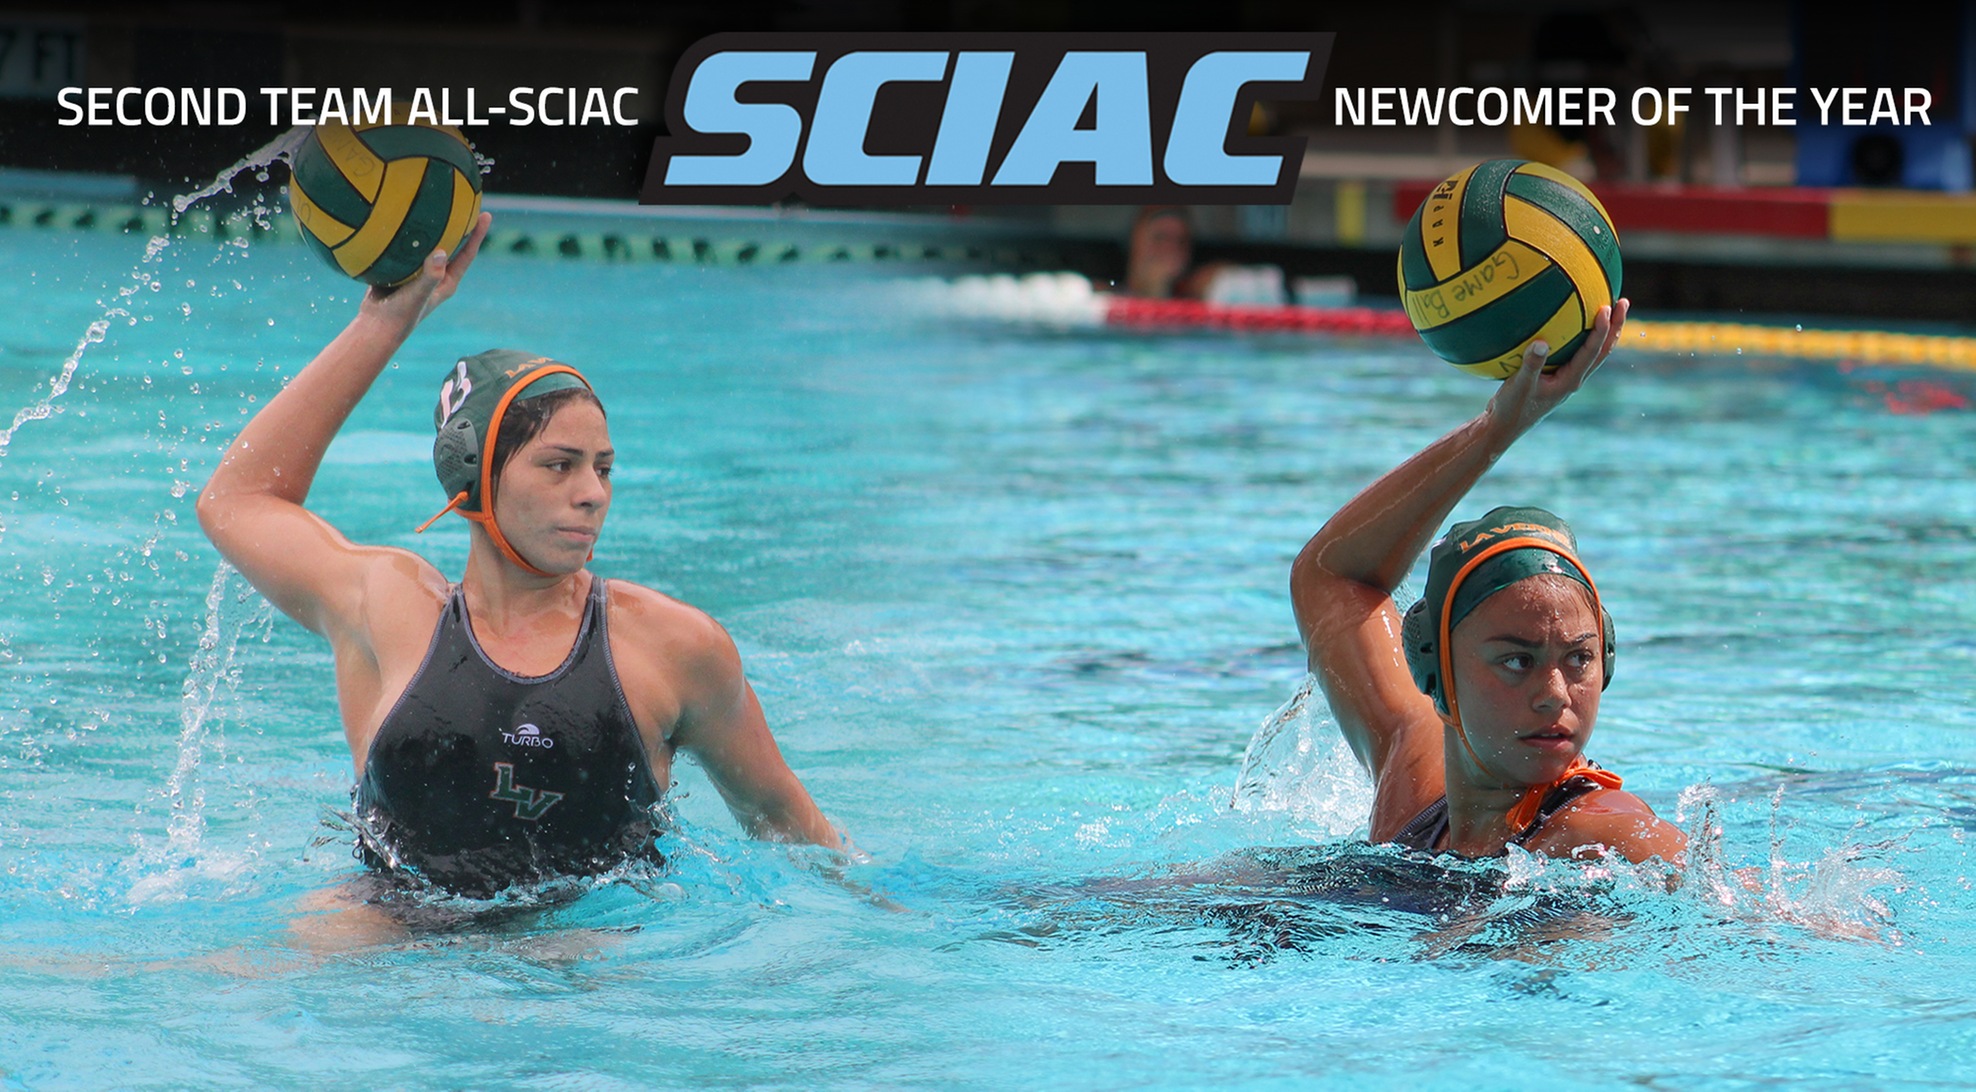 Kezman named Newcomer of the Year, Bustamante tabbed All-SCIAC